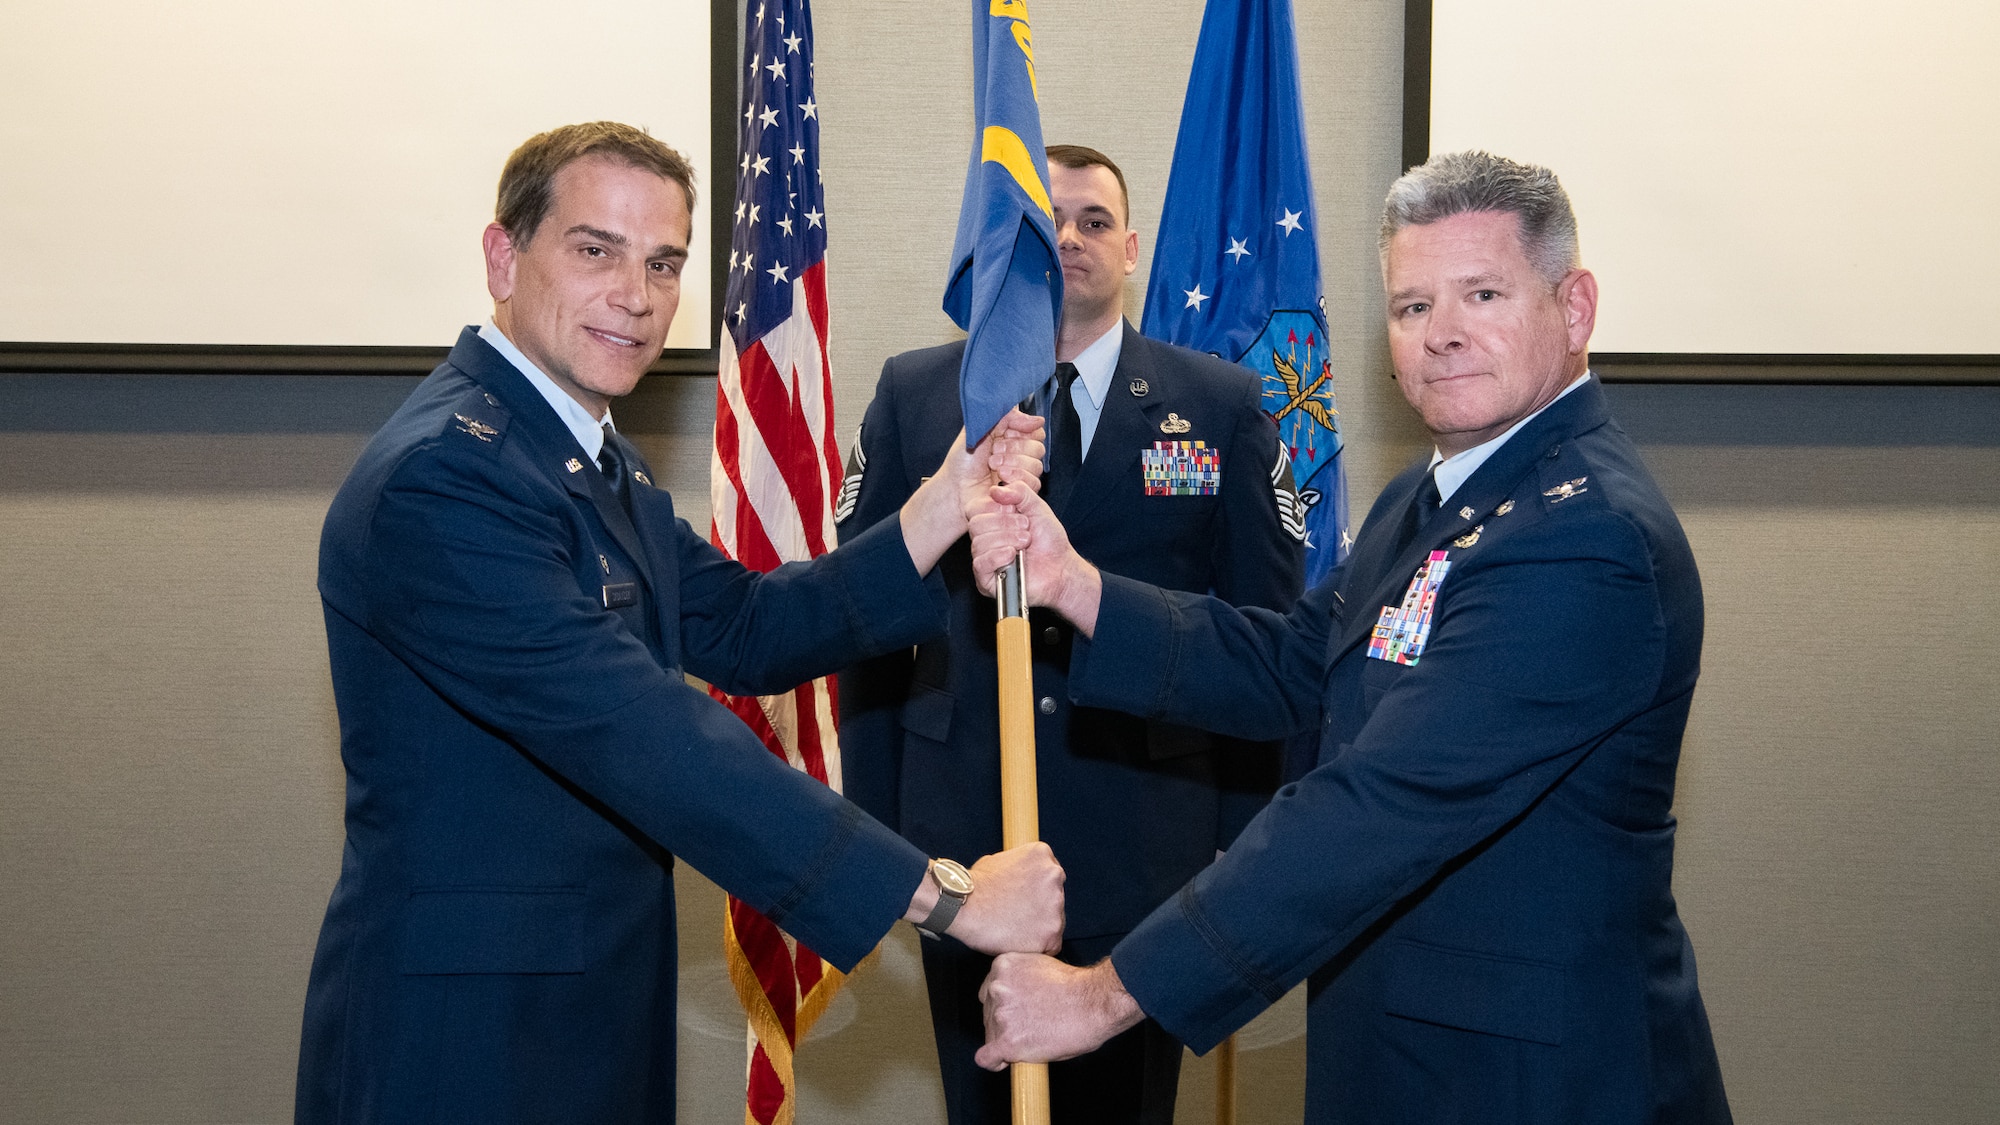 Two men in Air Force service dress grasp a flag pole while pausing for their photo to be taken.